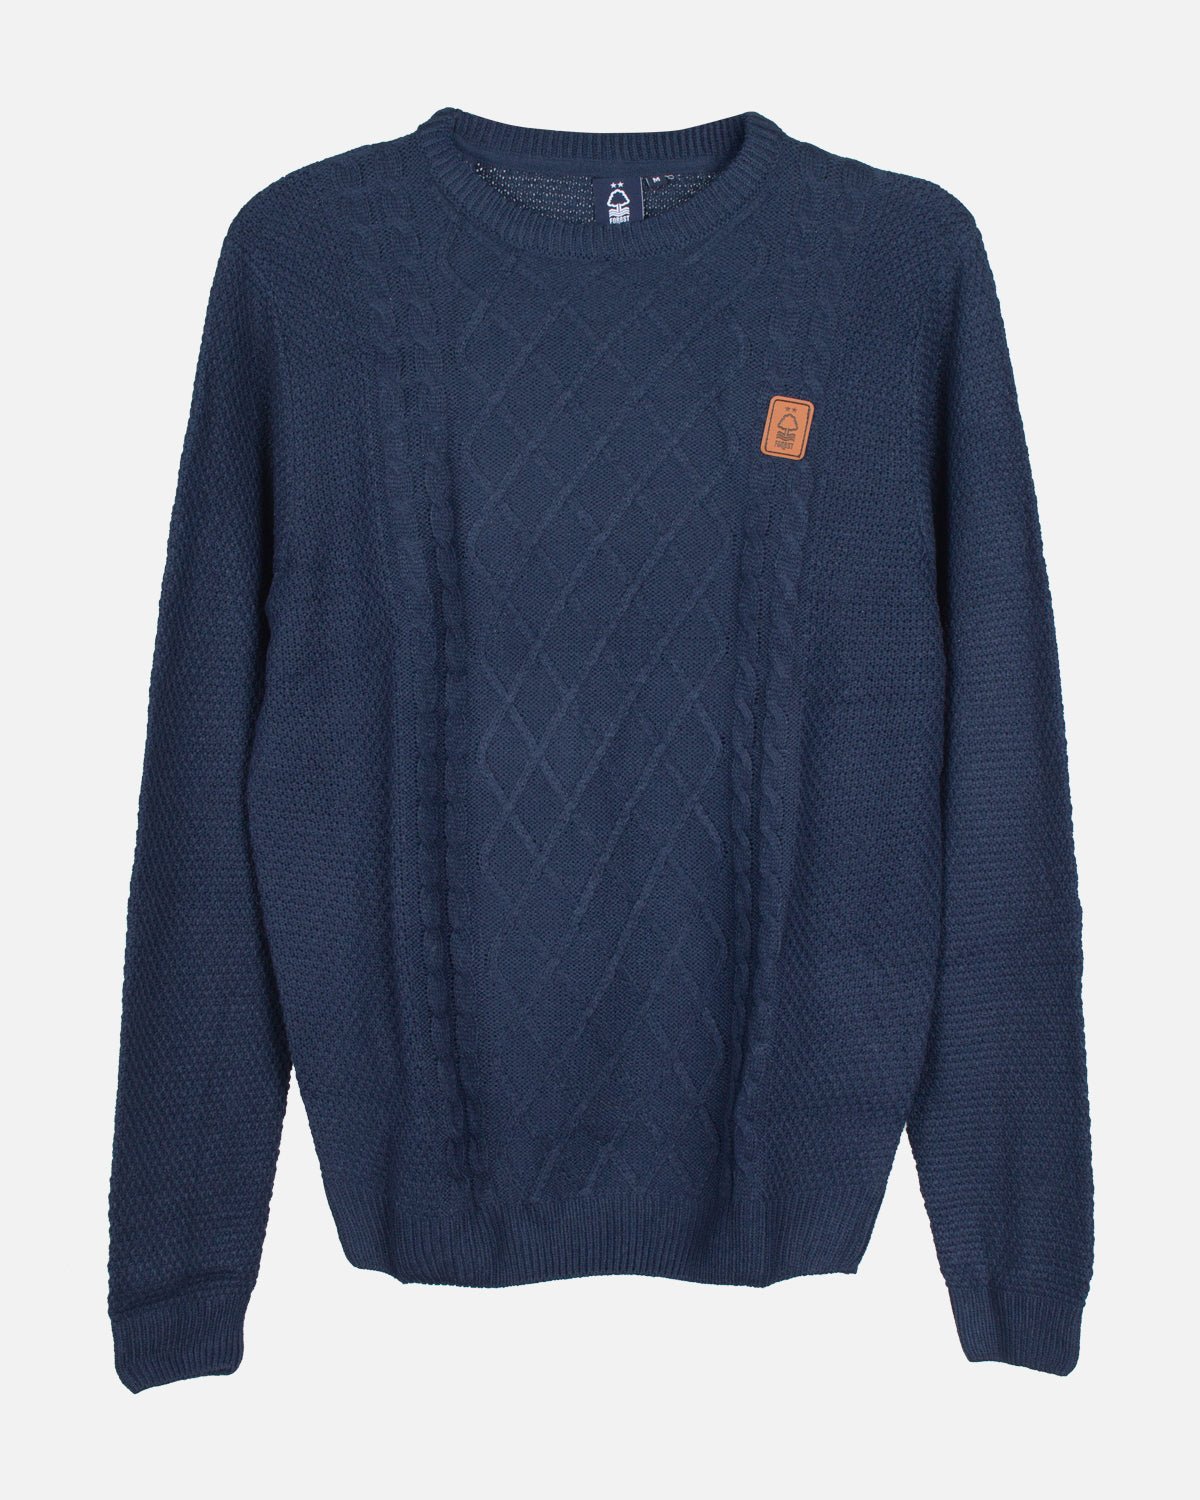 NFFC Navy Cable Knit Jumper - Nottingham Forest FC